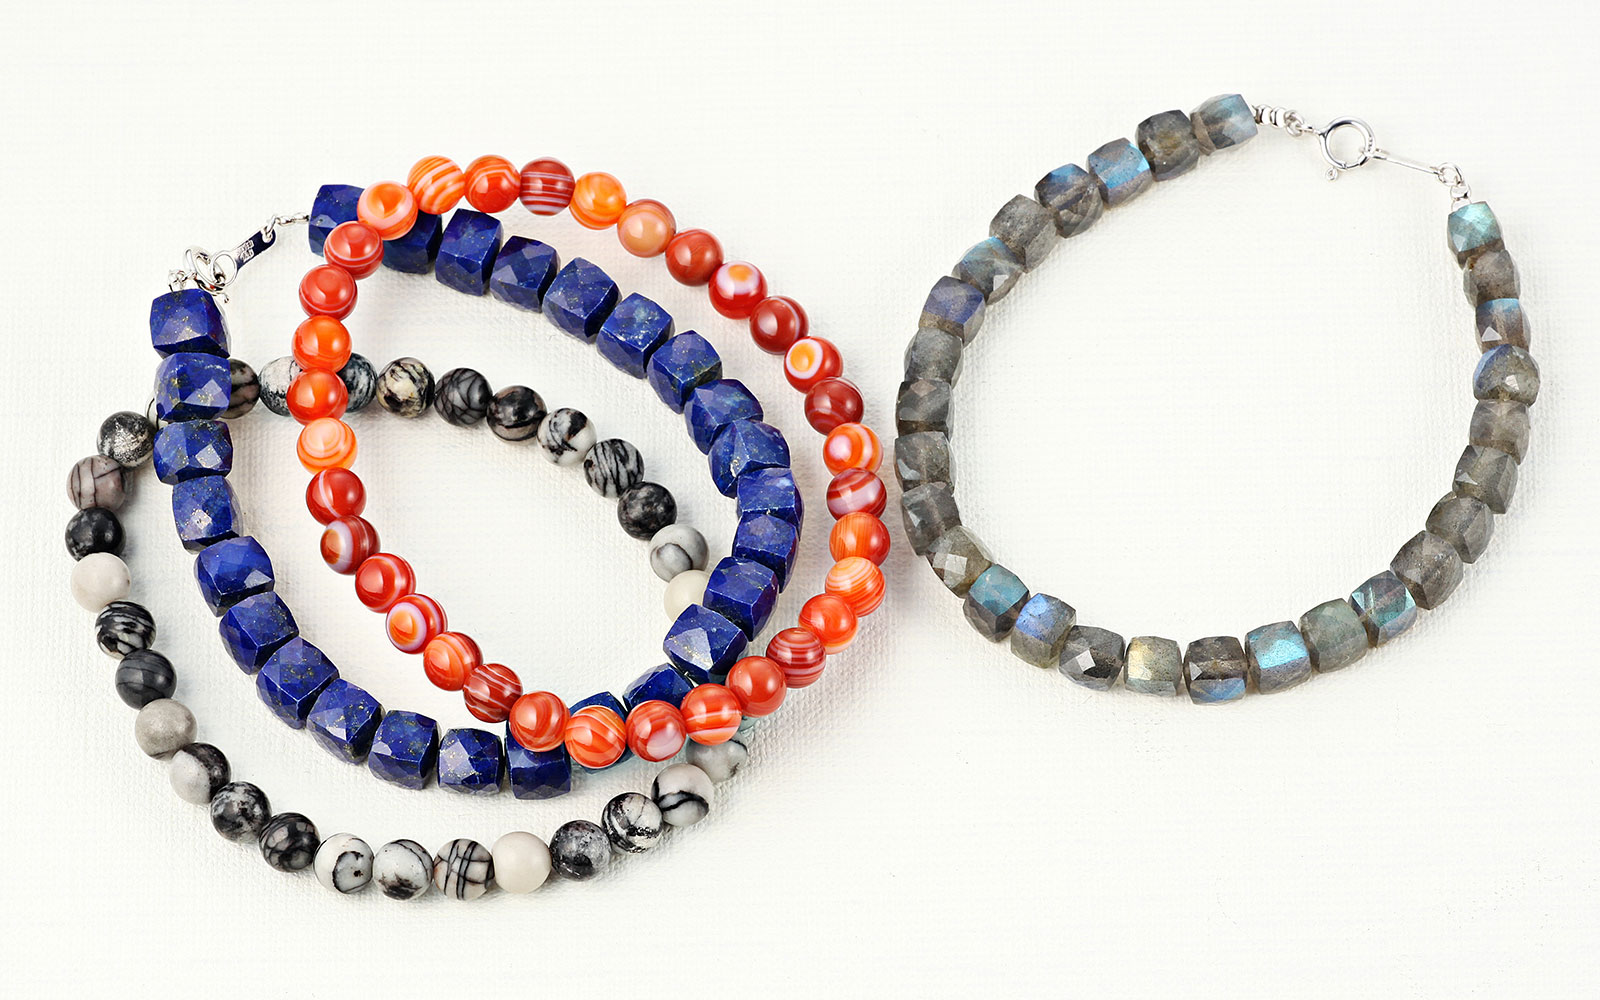 4 SEASONS JEWELRY COLOR STONE　Collection